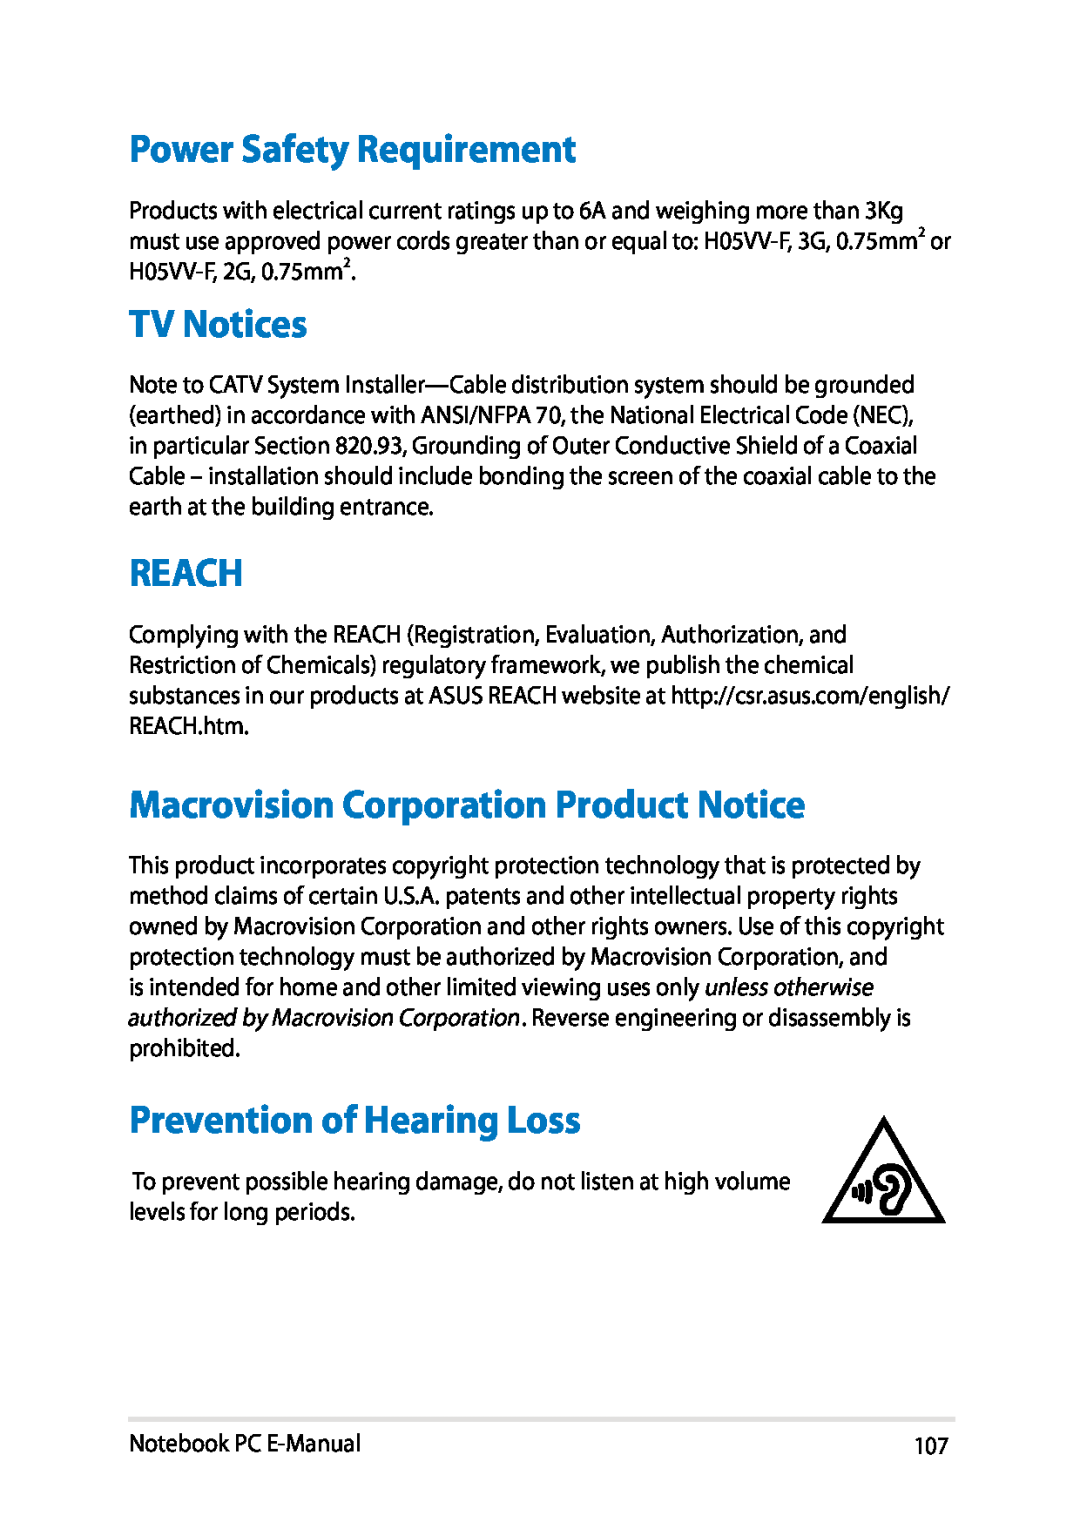 Asus E8438 Power Safety Requirement, TV Notices, Reach, Macrovision Corporation Product Notice, Prevention of Hearing Loss 